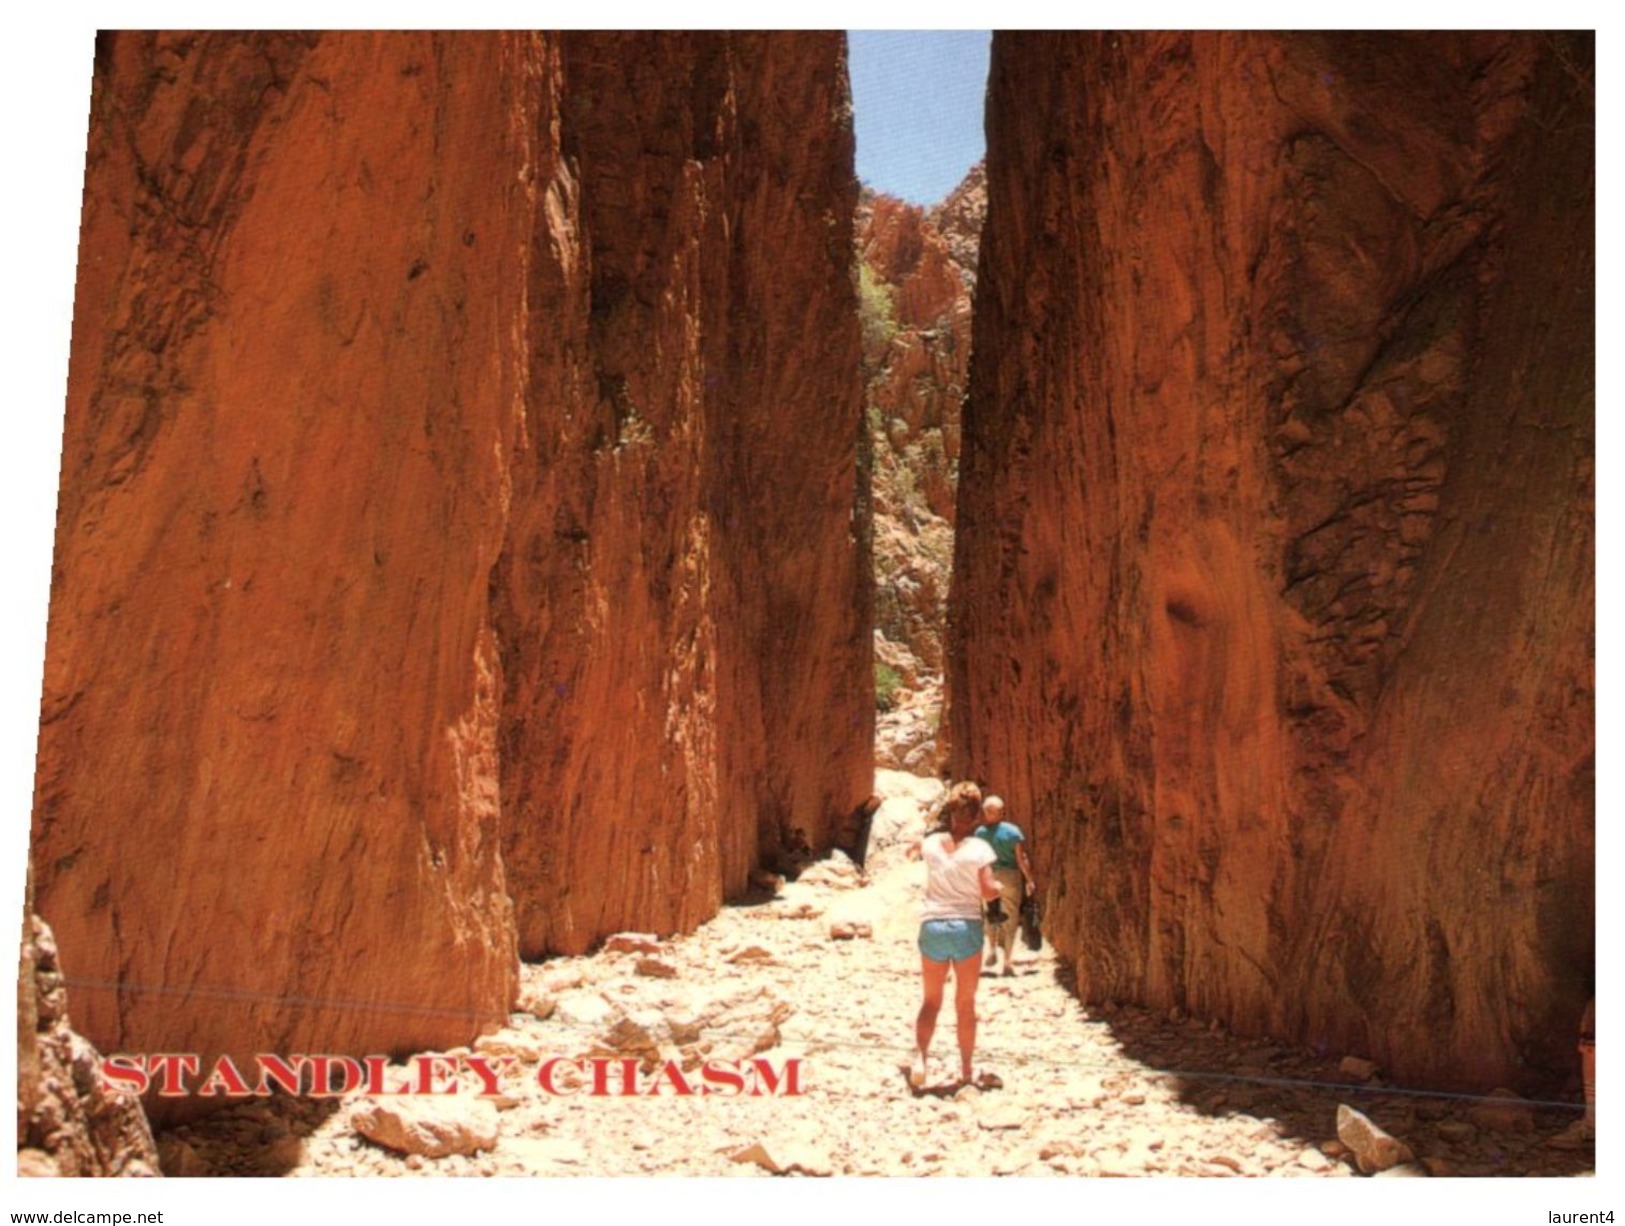 (300) Australia - NT - Standley Chasm - The Red Centre